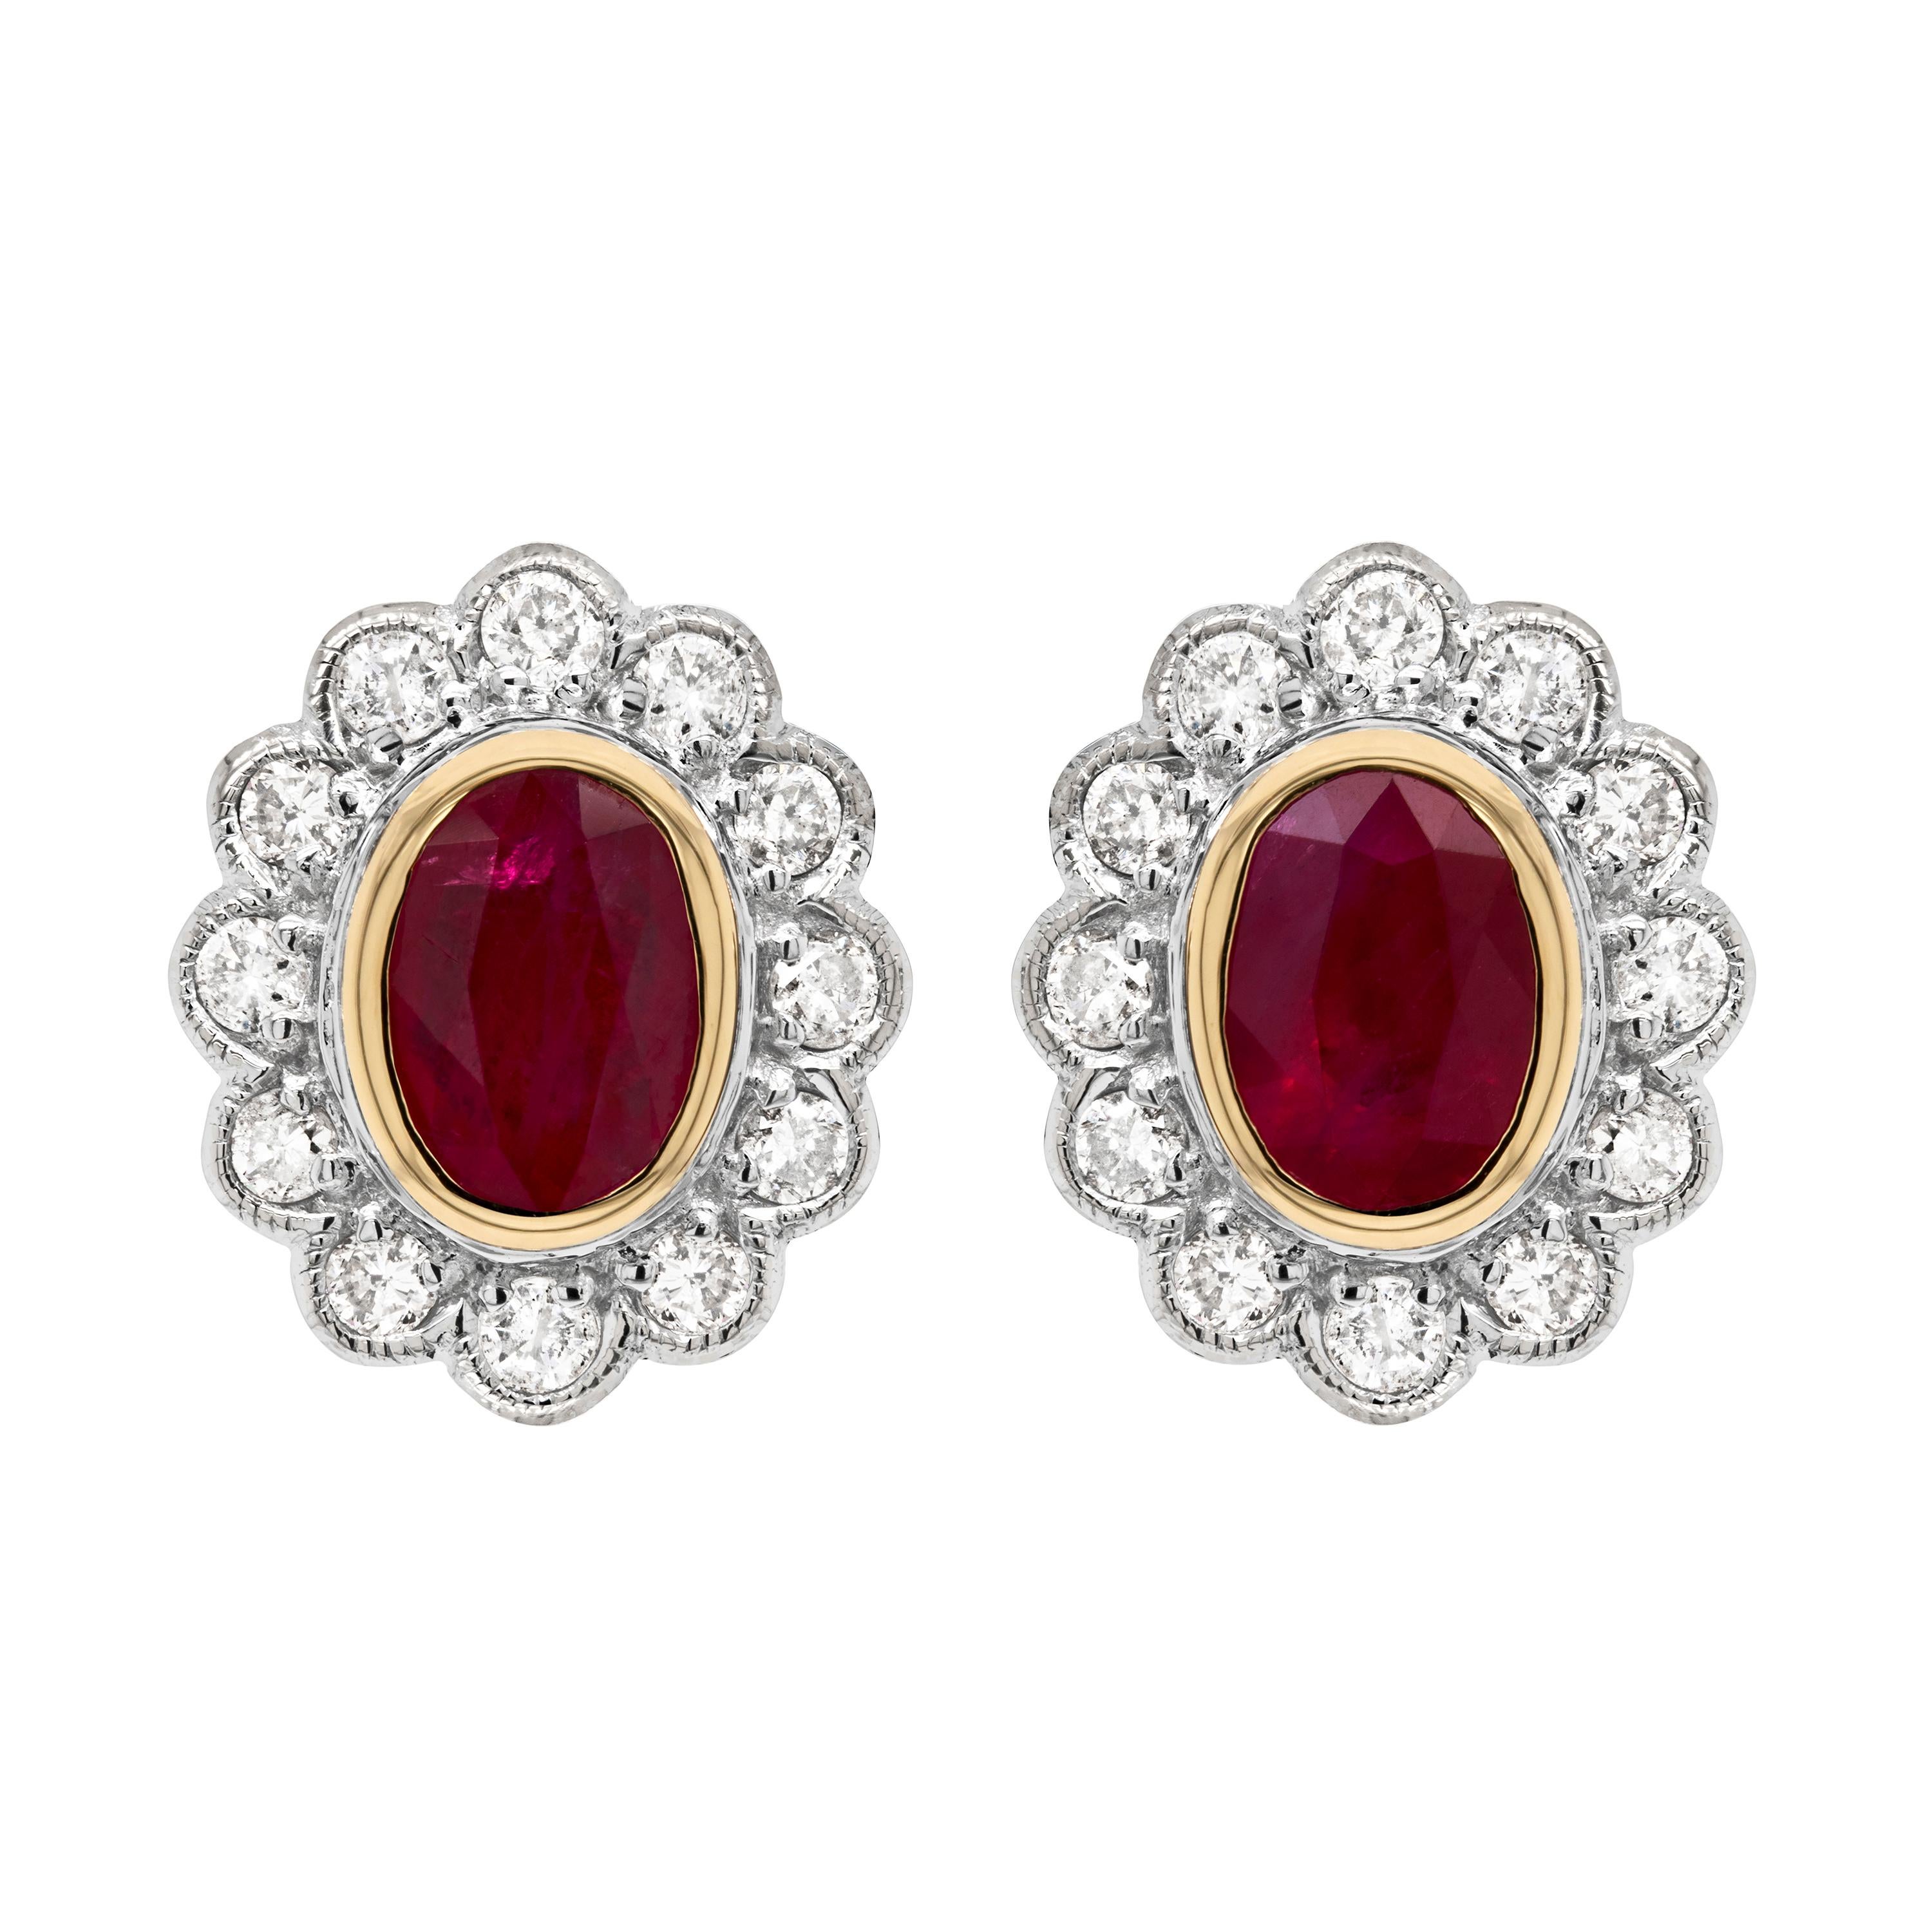 1.94 Carat Ruby and Diamond 18 Carat White and Yellow Gold Cluster Stud Earrings